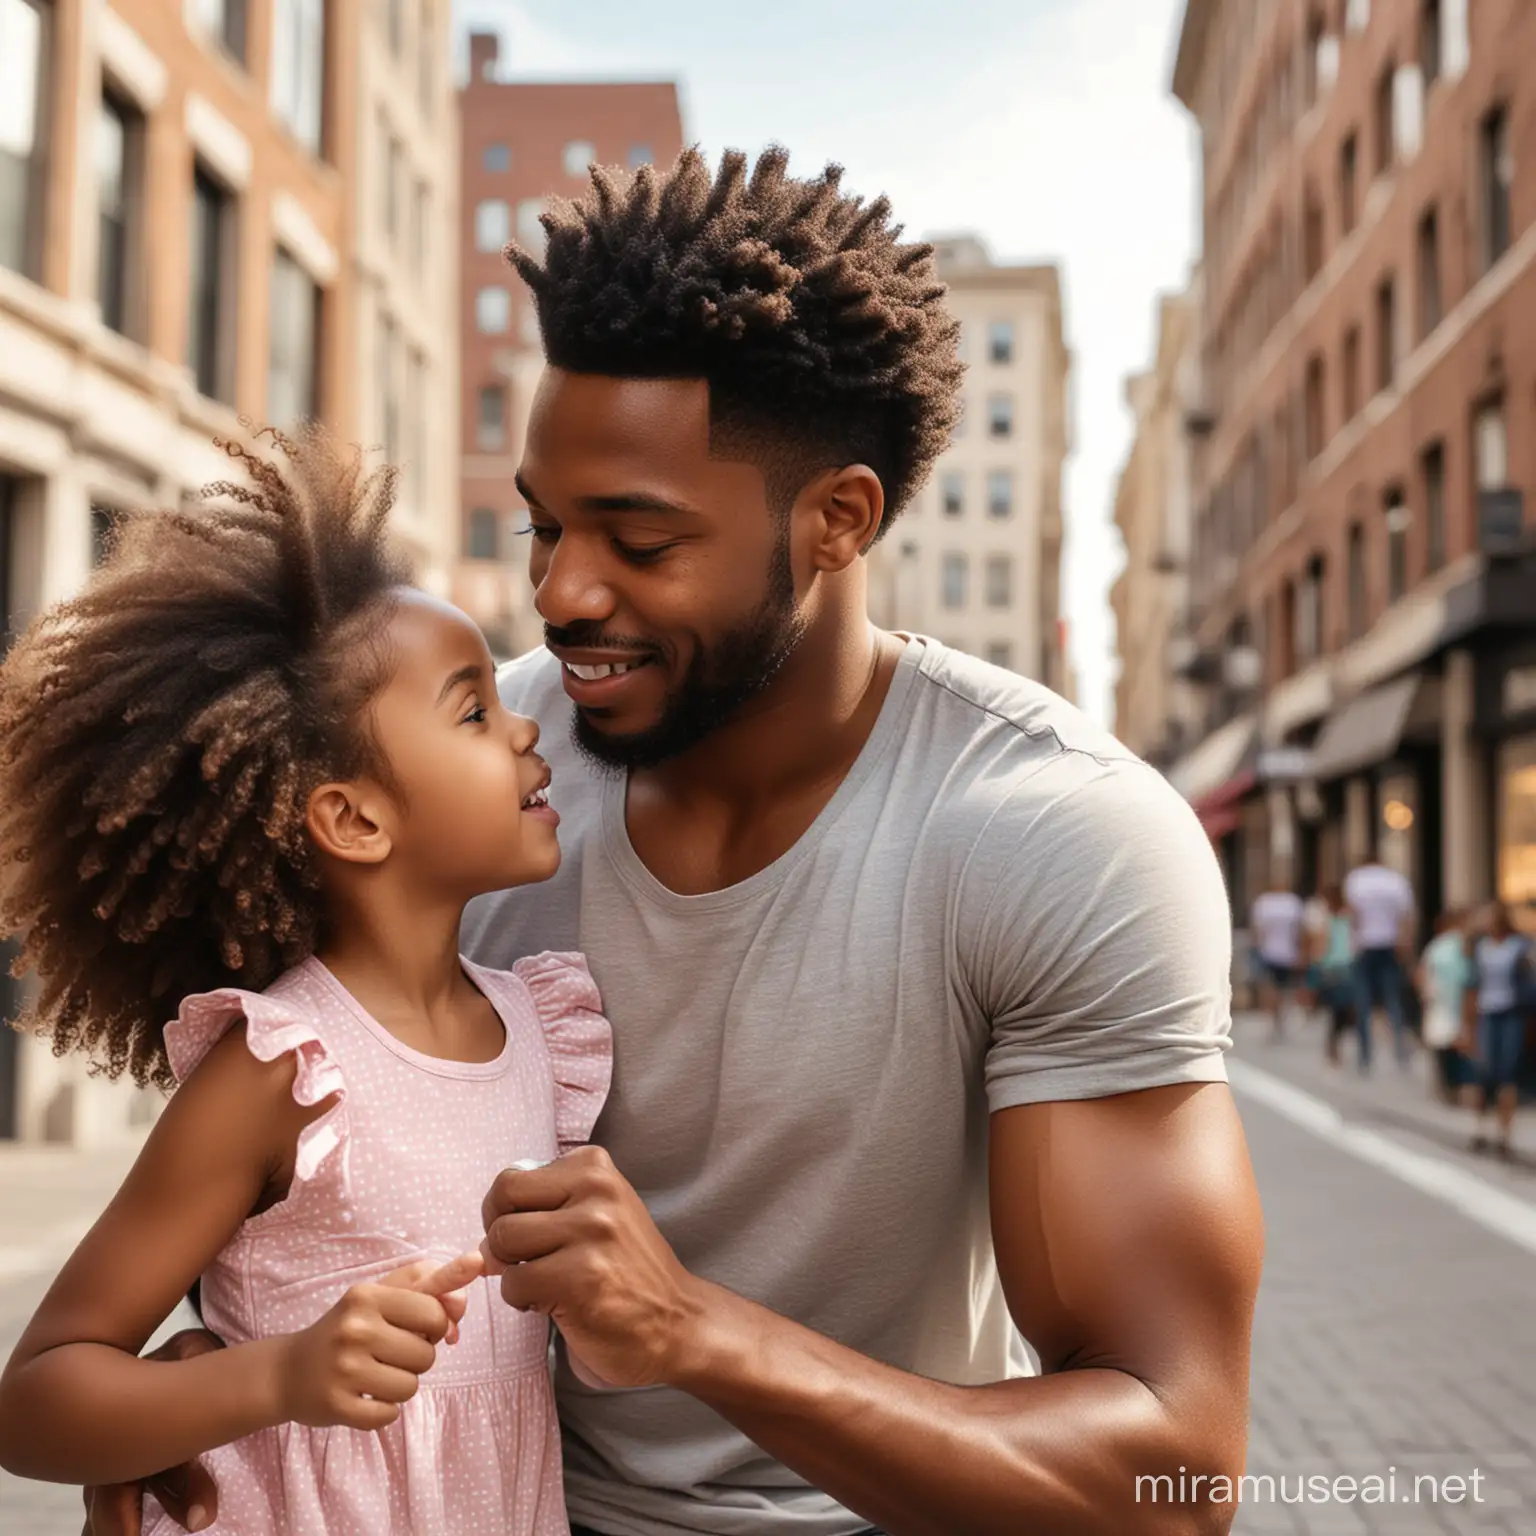 realistic image of a handsome african American man playing with his daughter looking in the city